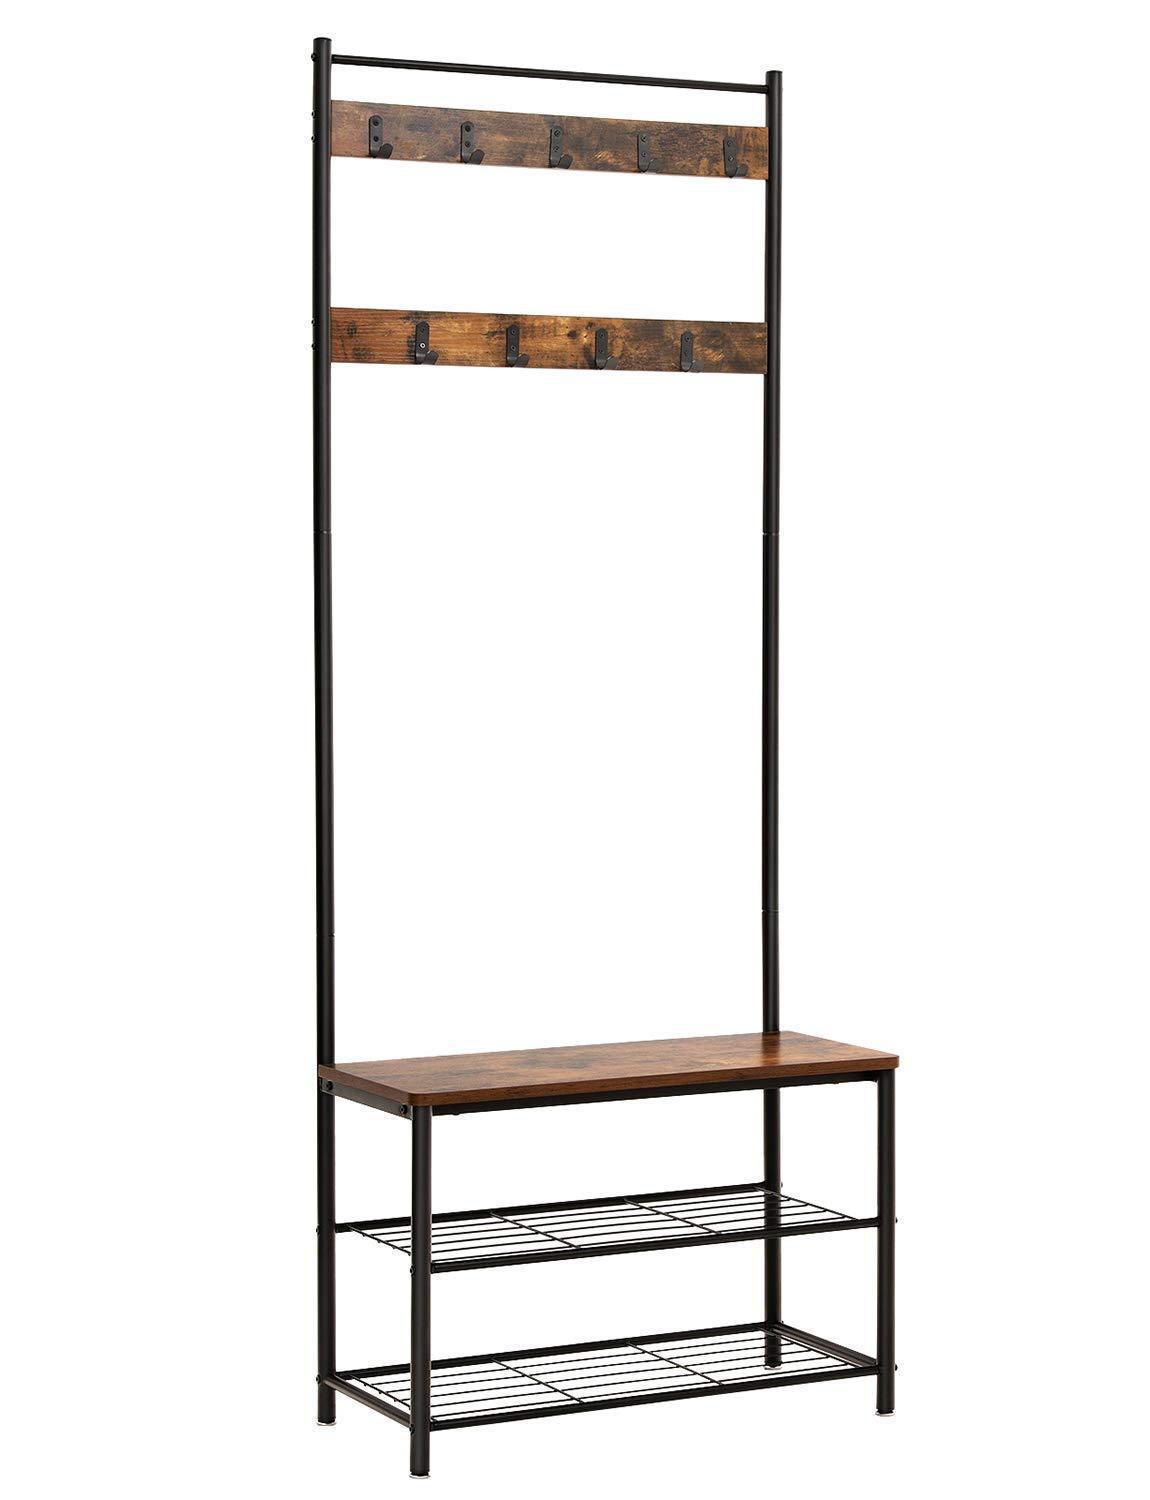 VASAGLE Industrial Coat Rack, Hall Tree Entryway Shoe Bench, Storage Shelf Organizer, Accent Furniture with Metal Frame UHSR41BX, Rustic Brown